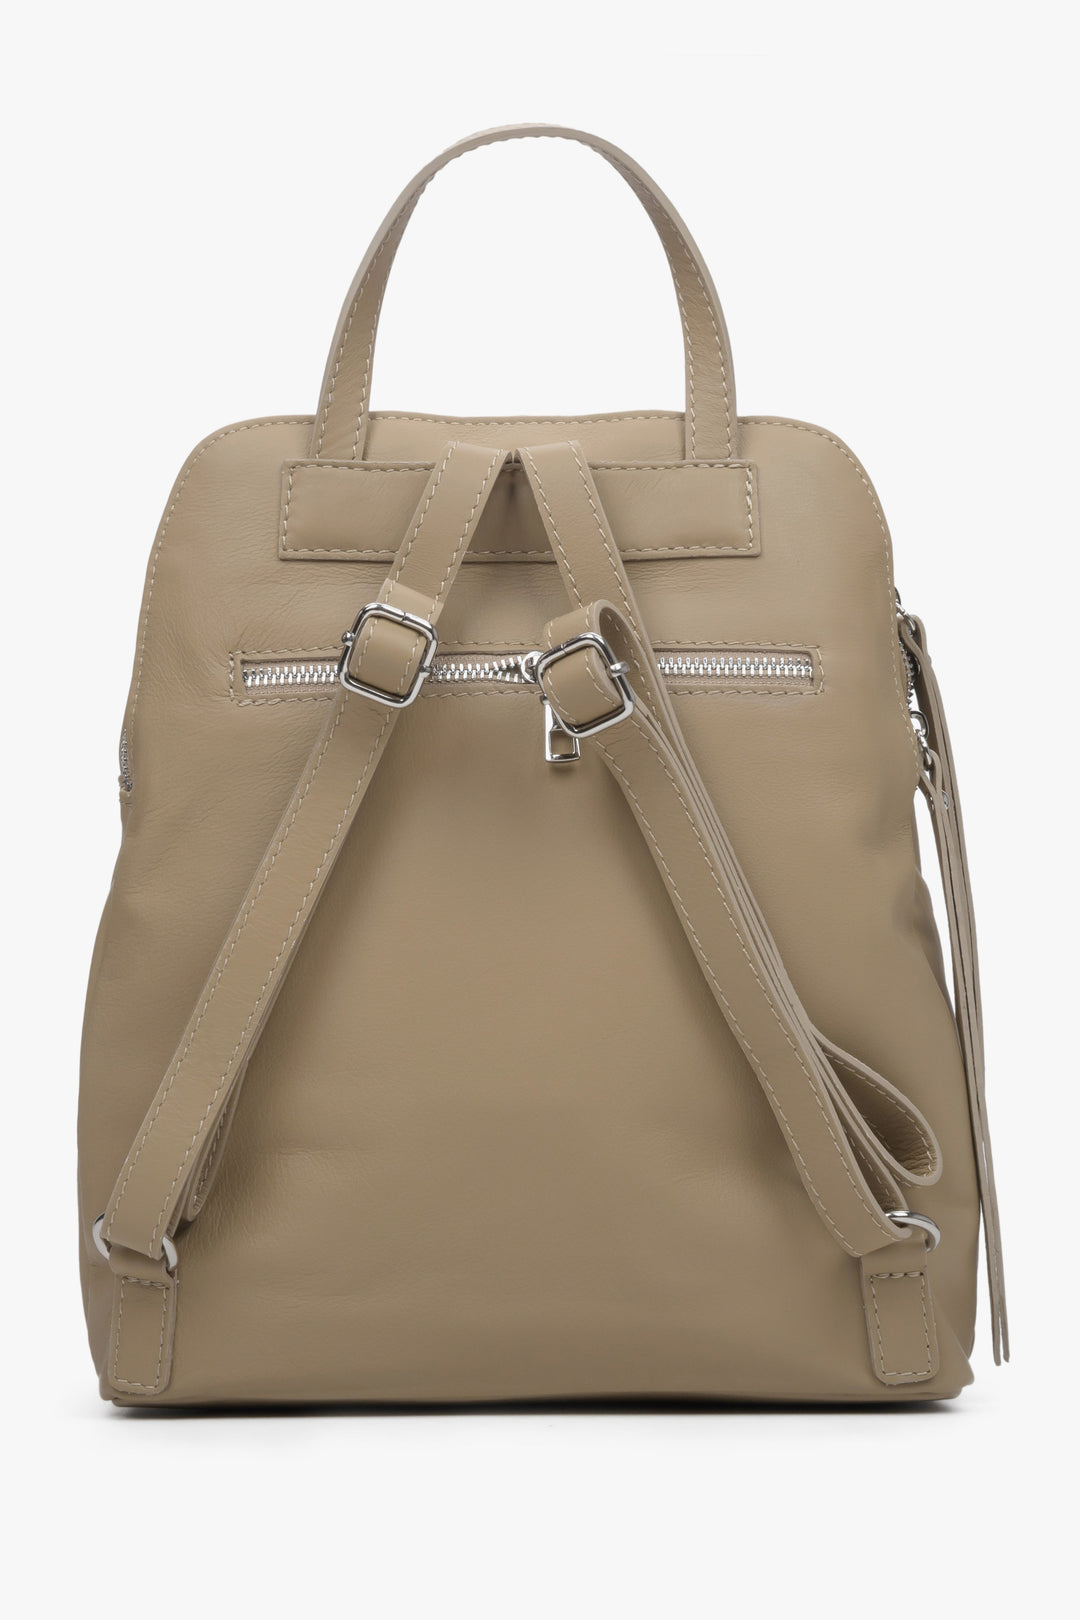 Women's leather beige Estro backpack - close-up on the back of the model.